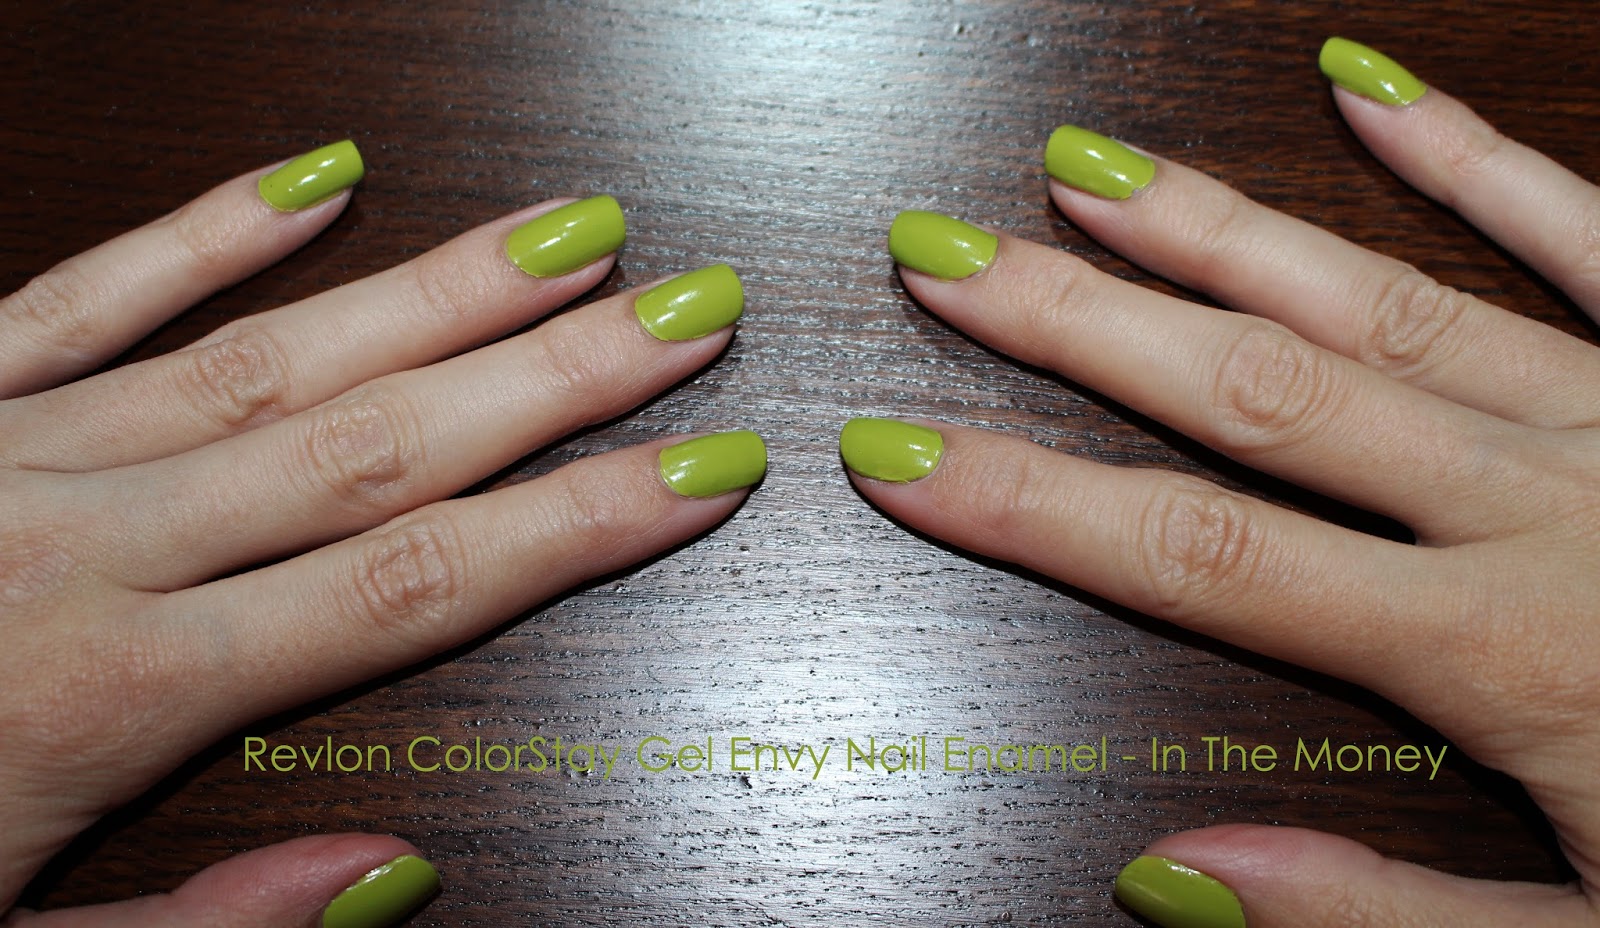 5. Revlon ColorStay Gel Envy Nail Polish in "Red Carpet" (2024 Collection) - wide 8